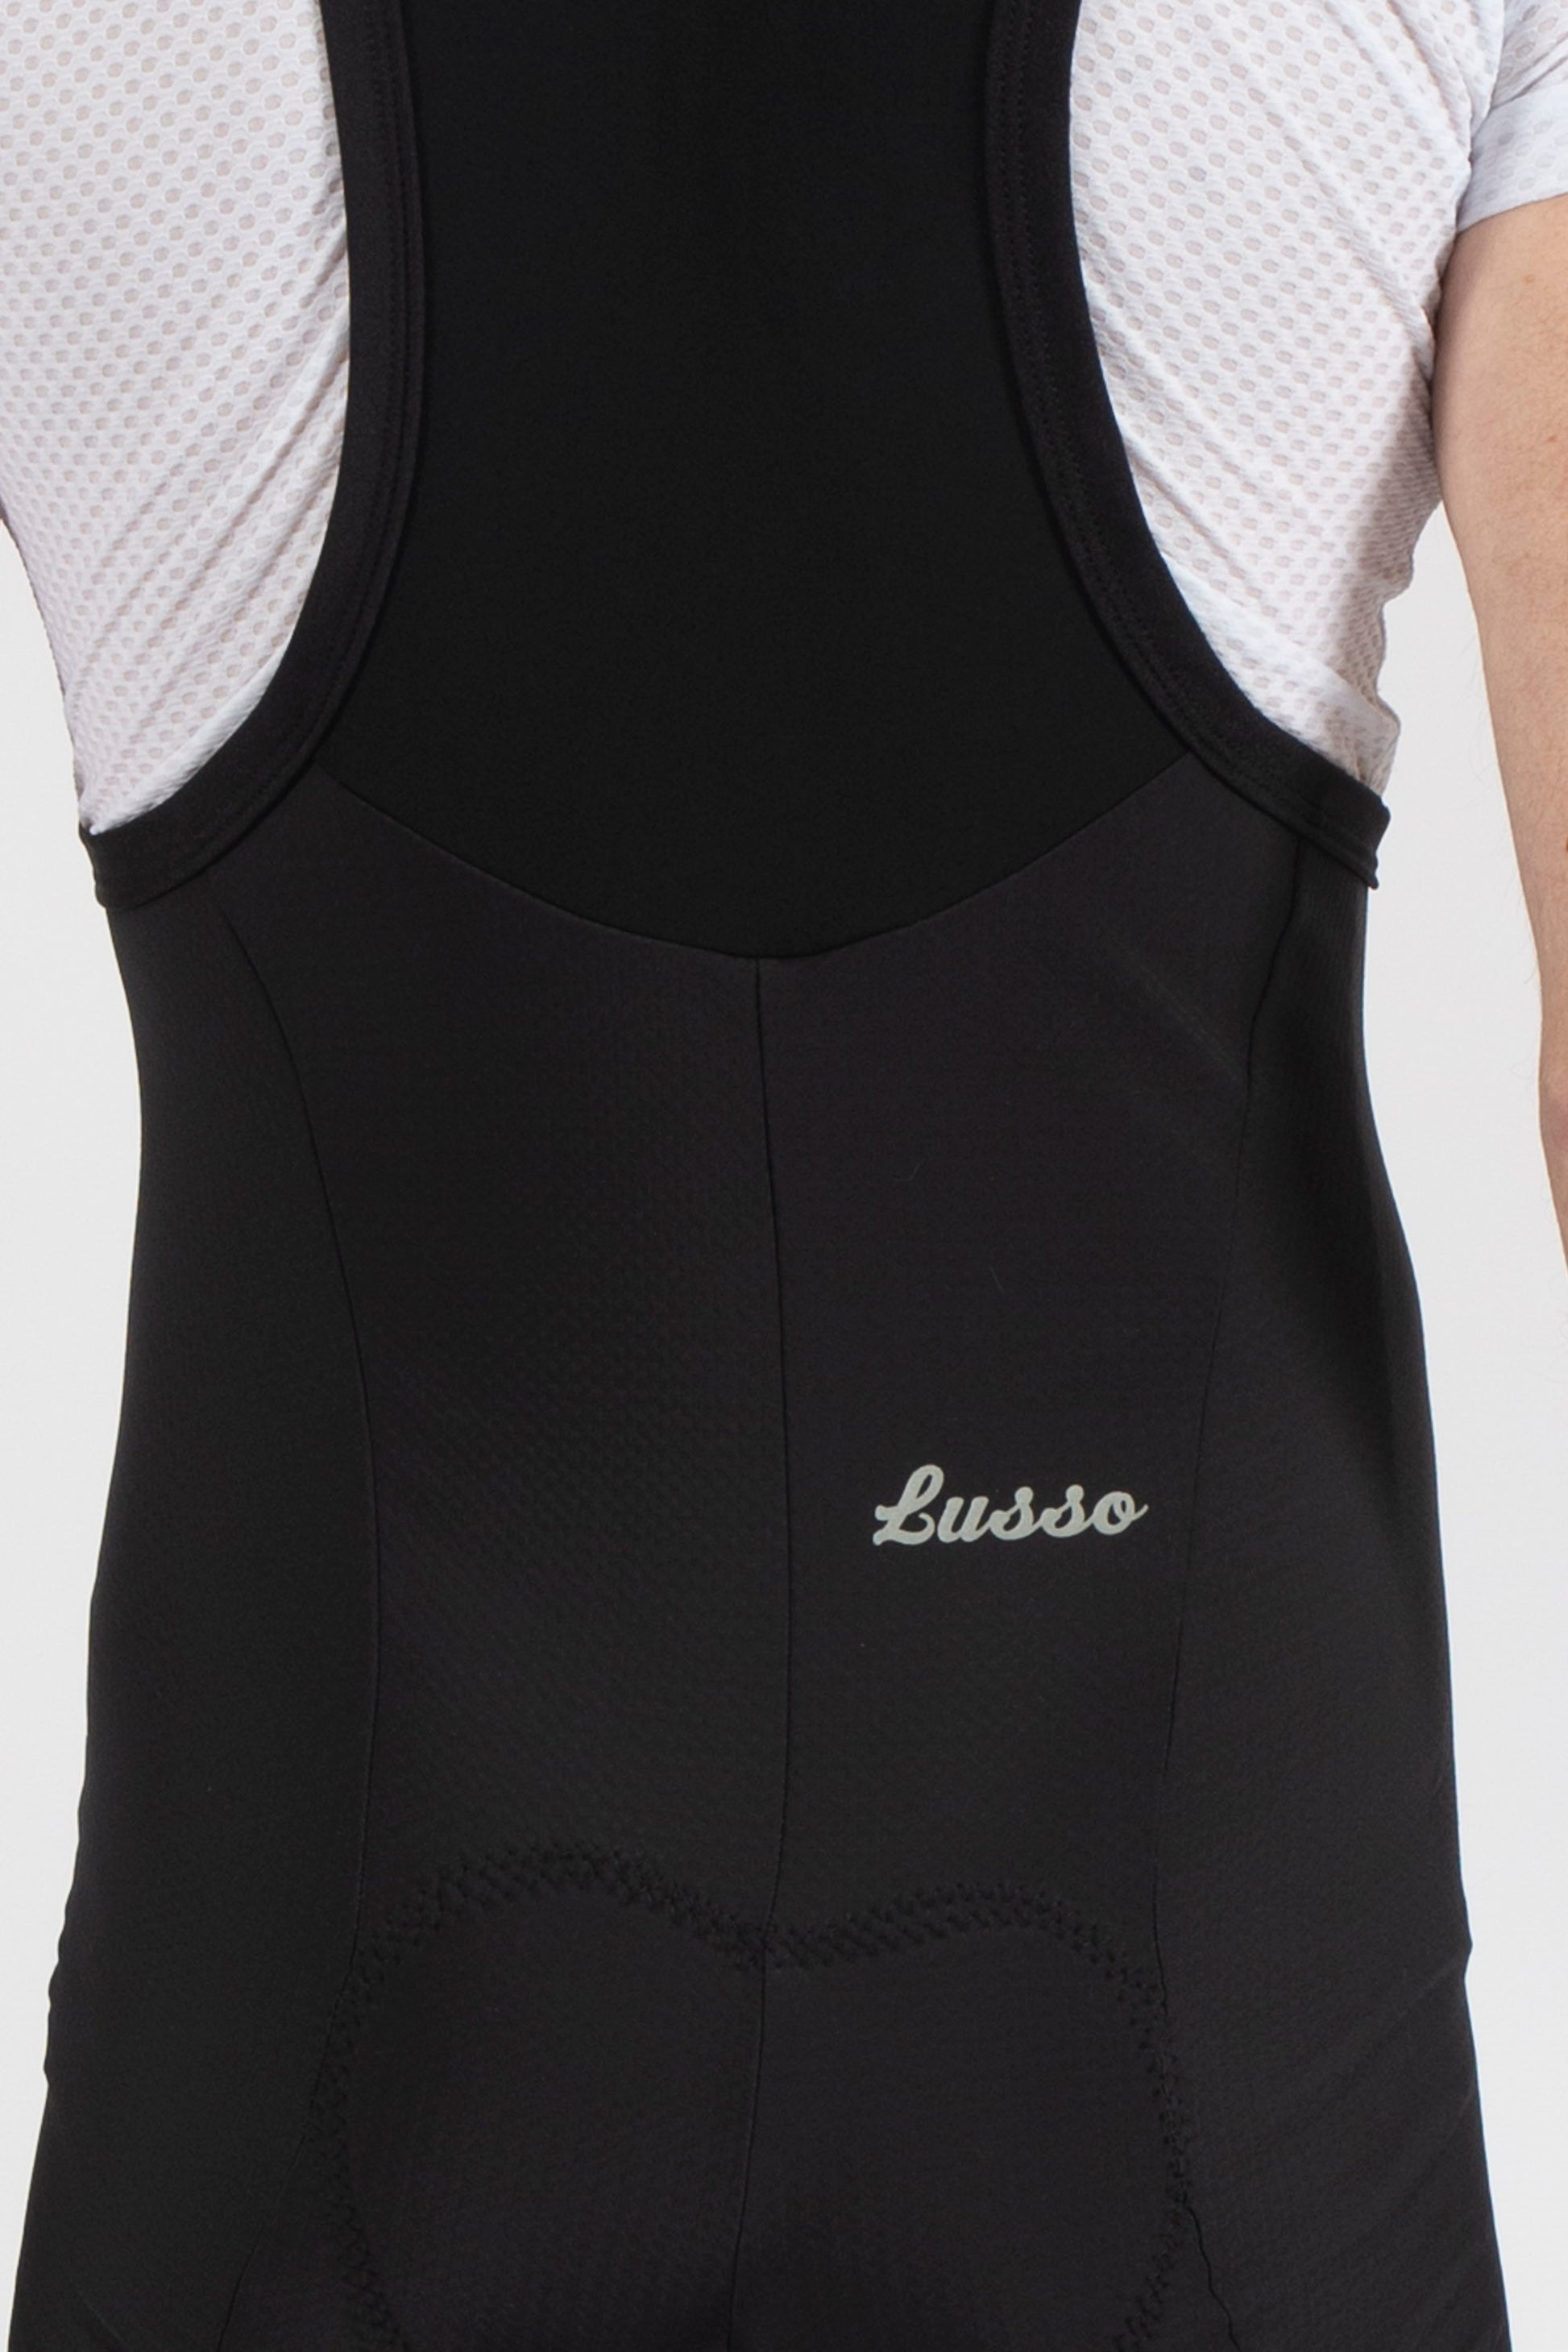 Thermal 3/4 Bibtights - Lusso Cycle Wear